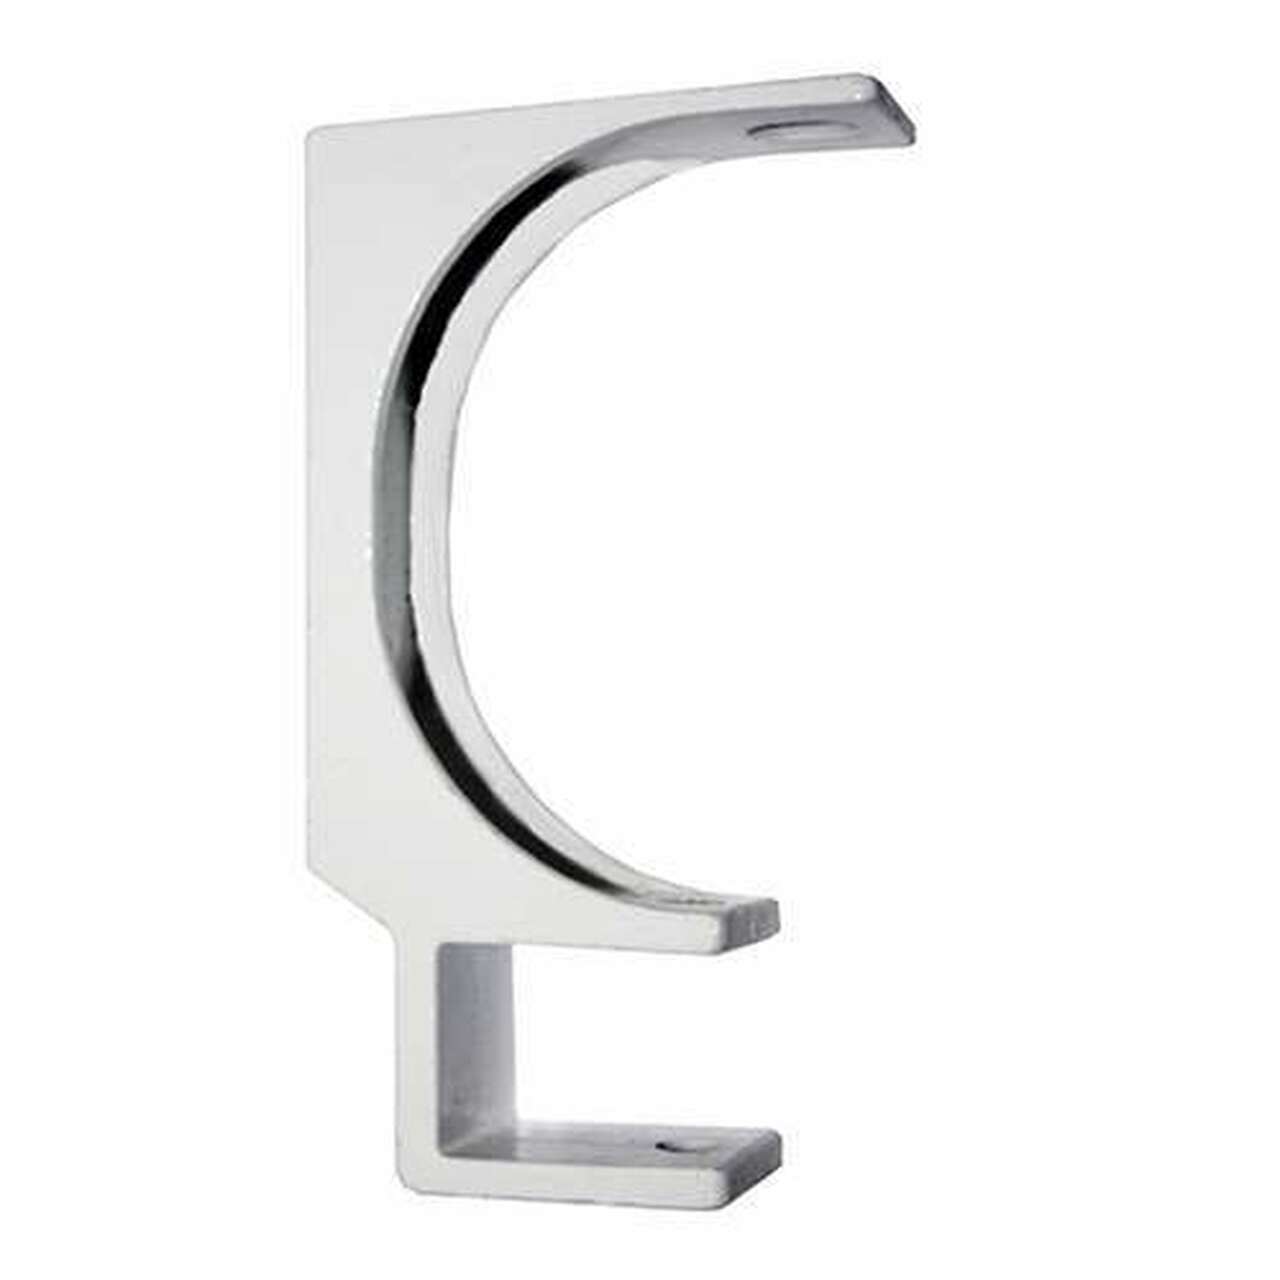 Aleko Ceiling Bracket for Retractable Awning - White